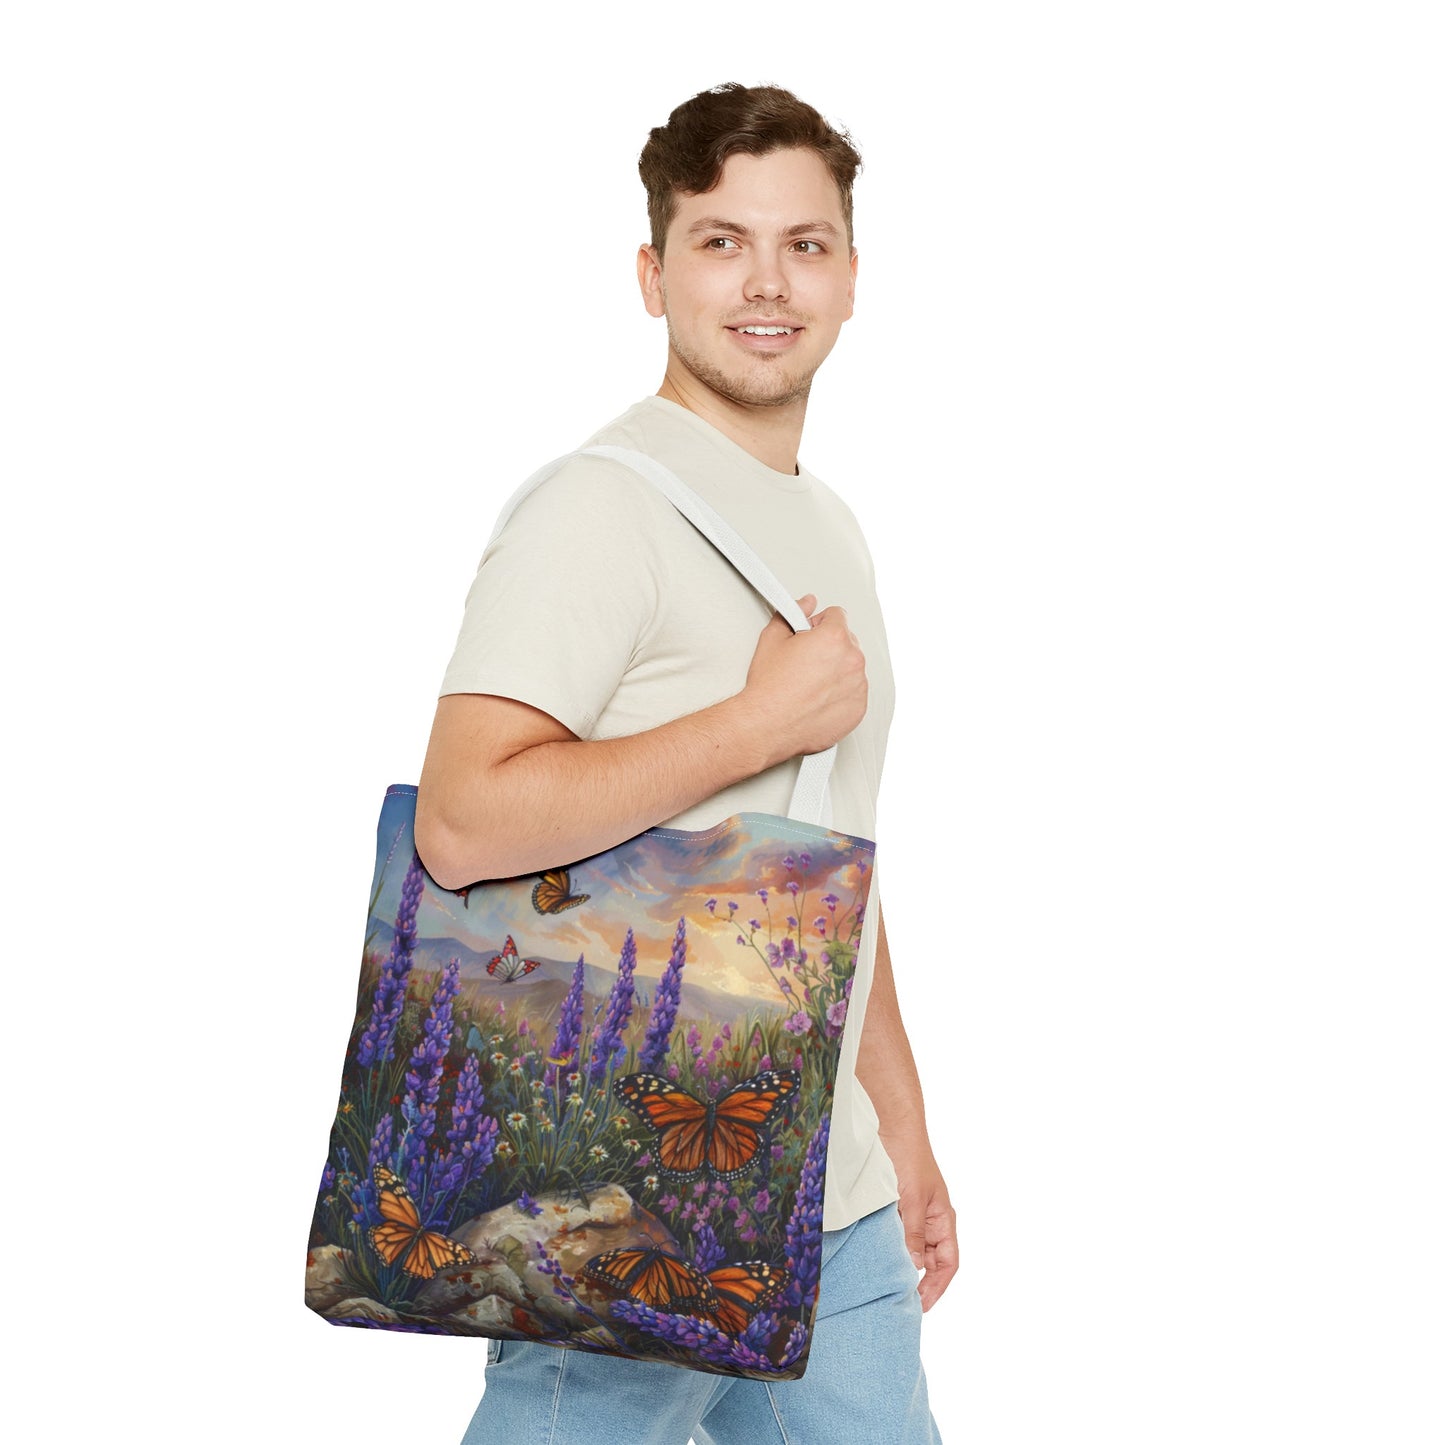 Butterfly Flowers 1 Tote Bag